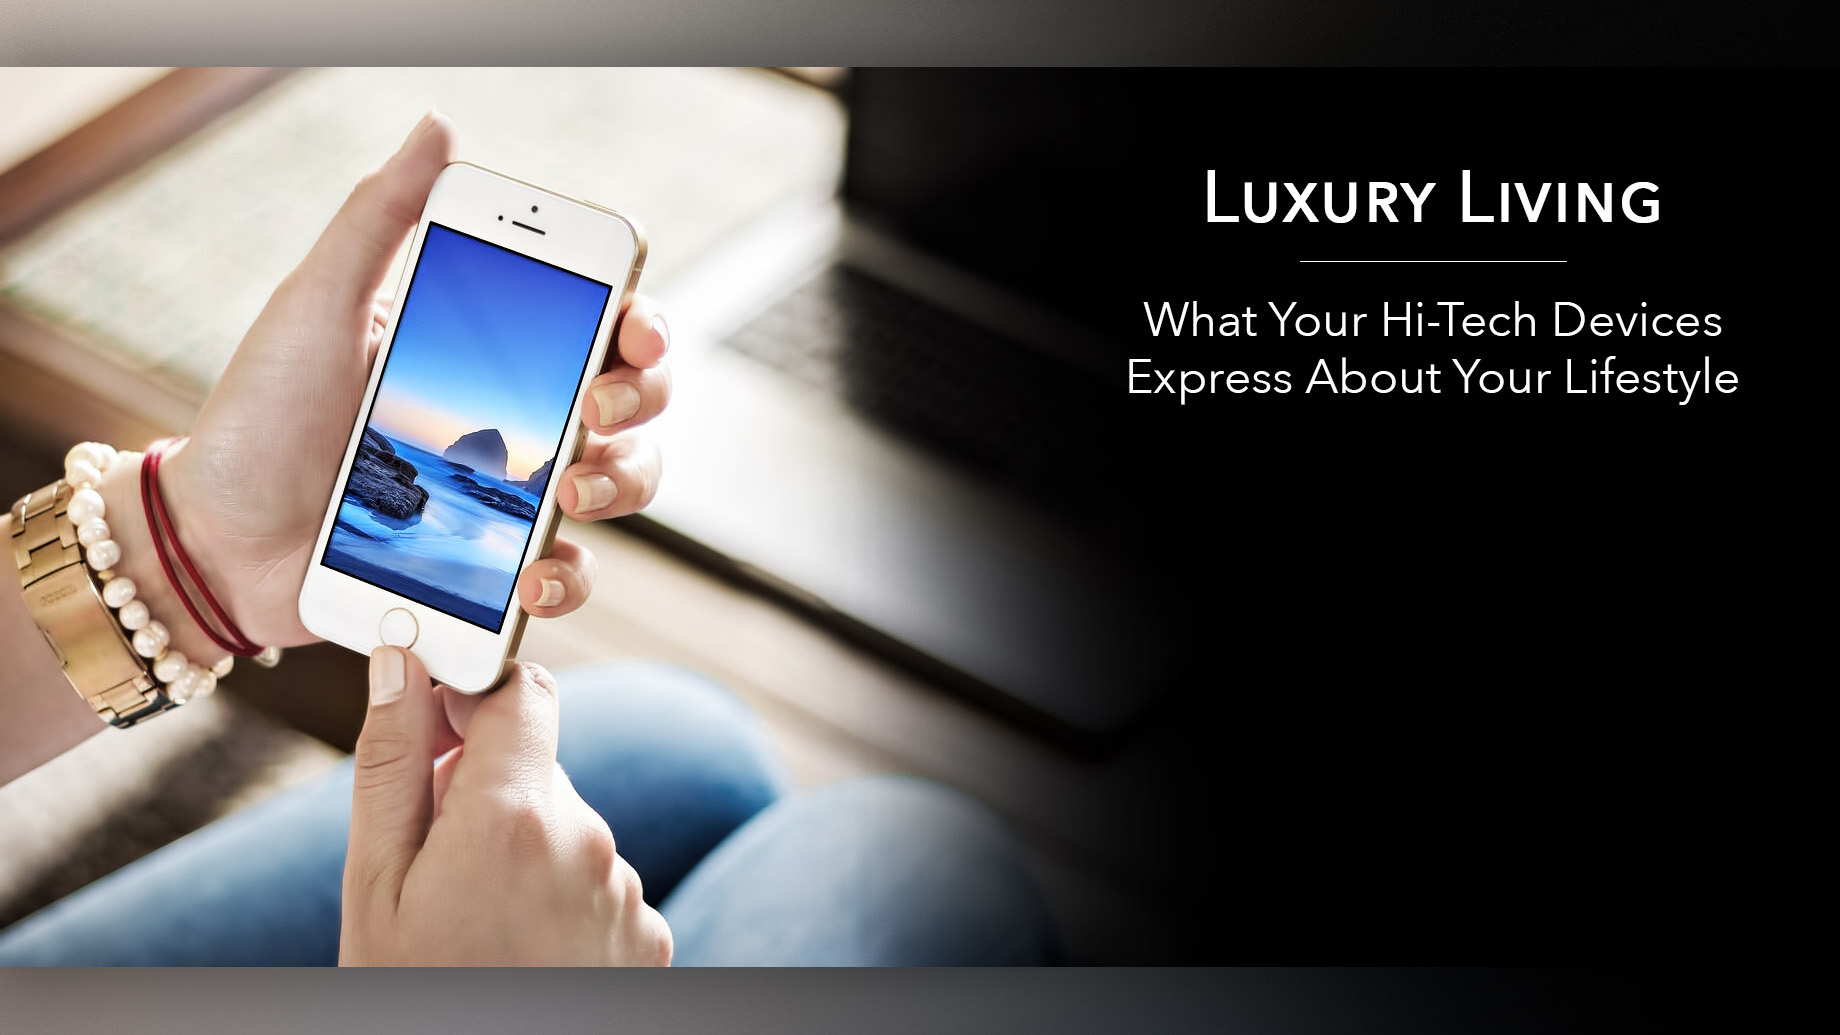 Luxury Living - What Your Hi-Tech Devices Express About Your Lifestyle